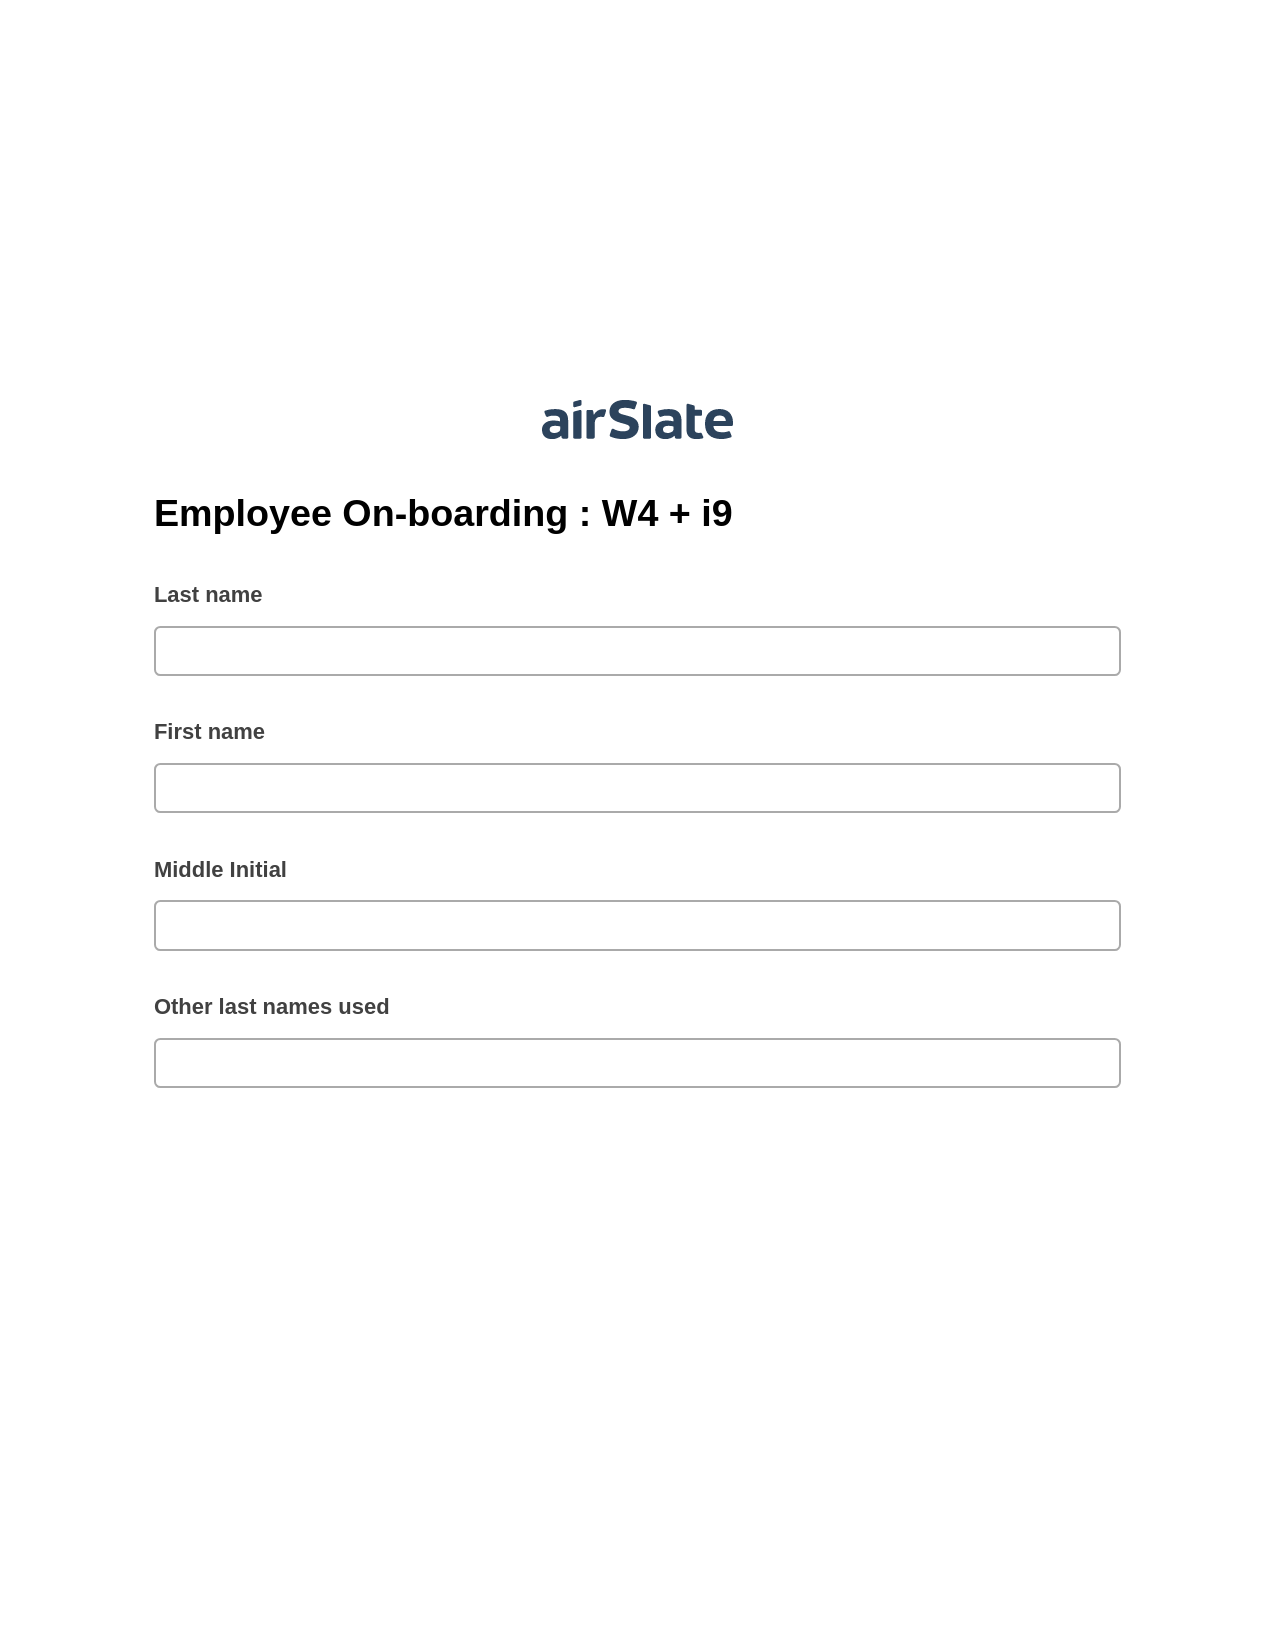 Employee On-boarding : W4 + i9 Pre-fill from Smartsheet Bot, Unassign Role Bot, Export to Google Sheet Bot